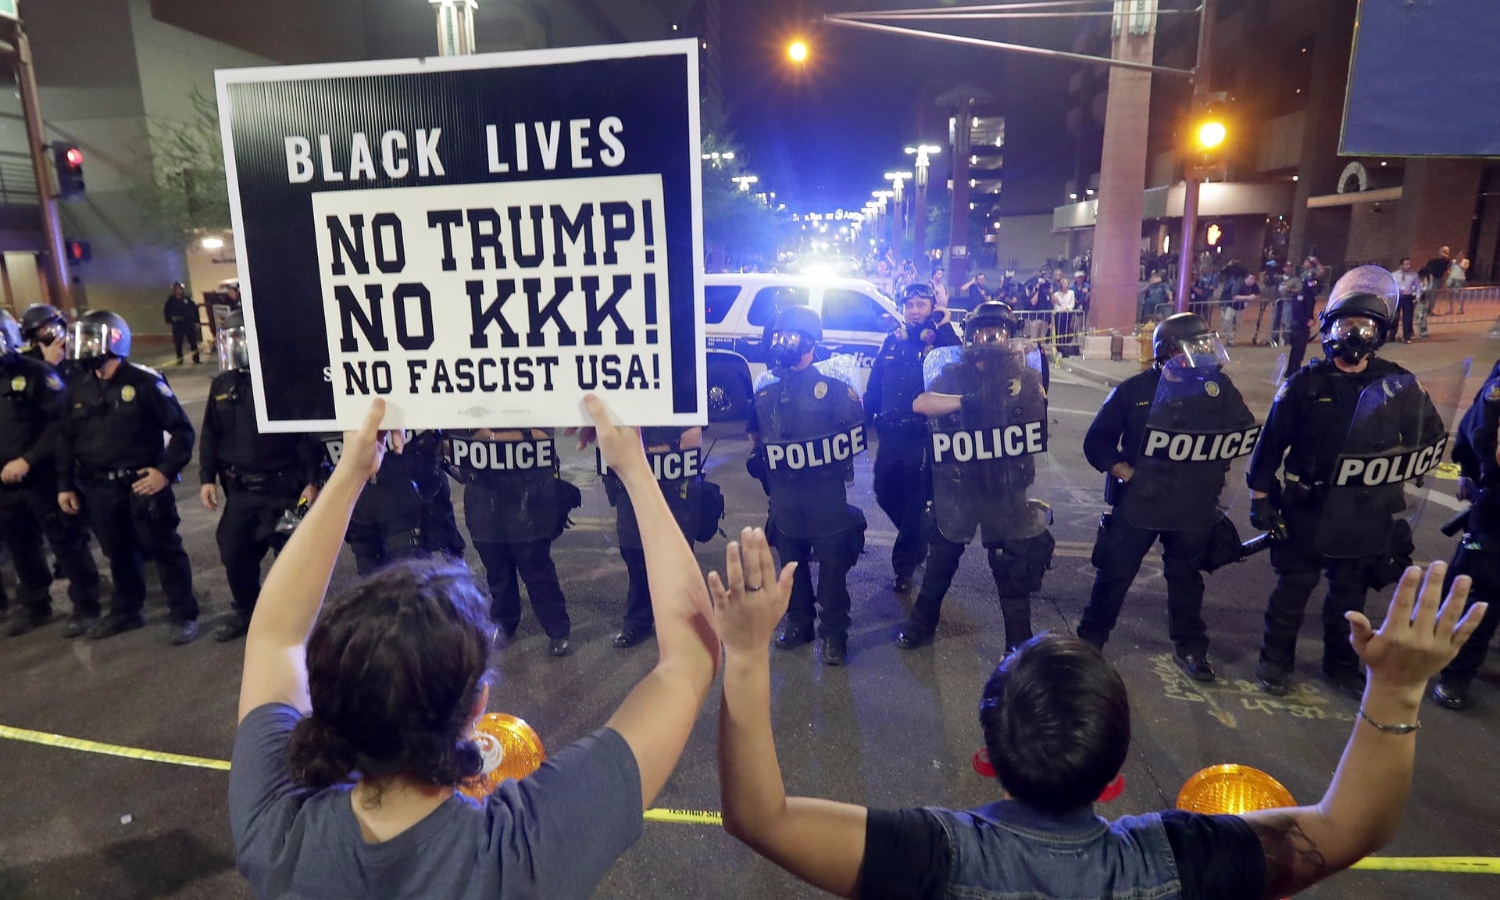 Protesters outside the Trump rally in Phoenix raise their hands after police used teargas to disperse the crowd. Photograph: Matt York/AP